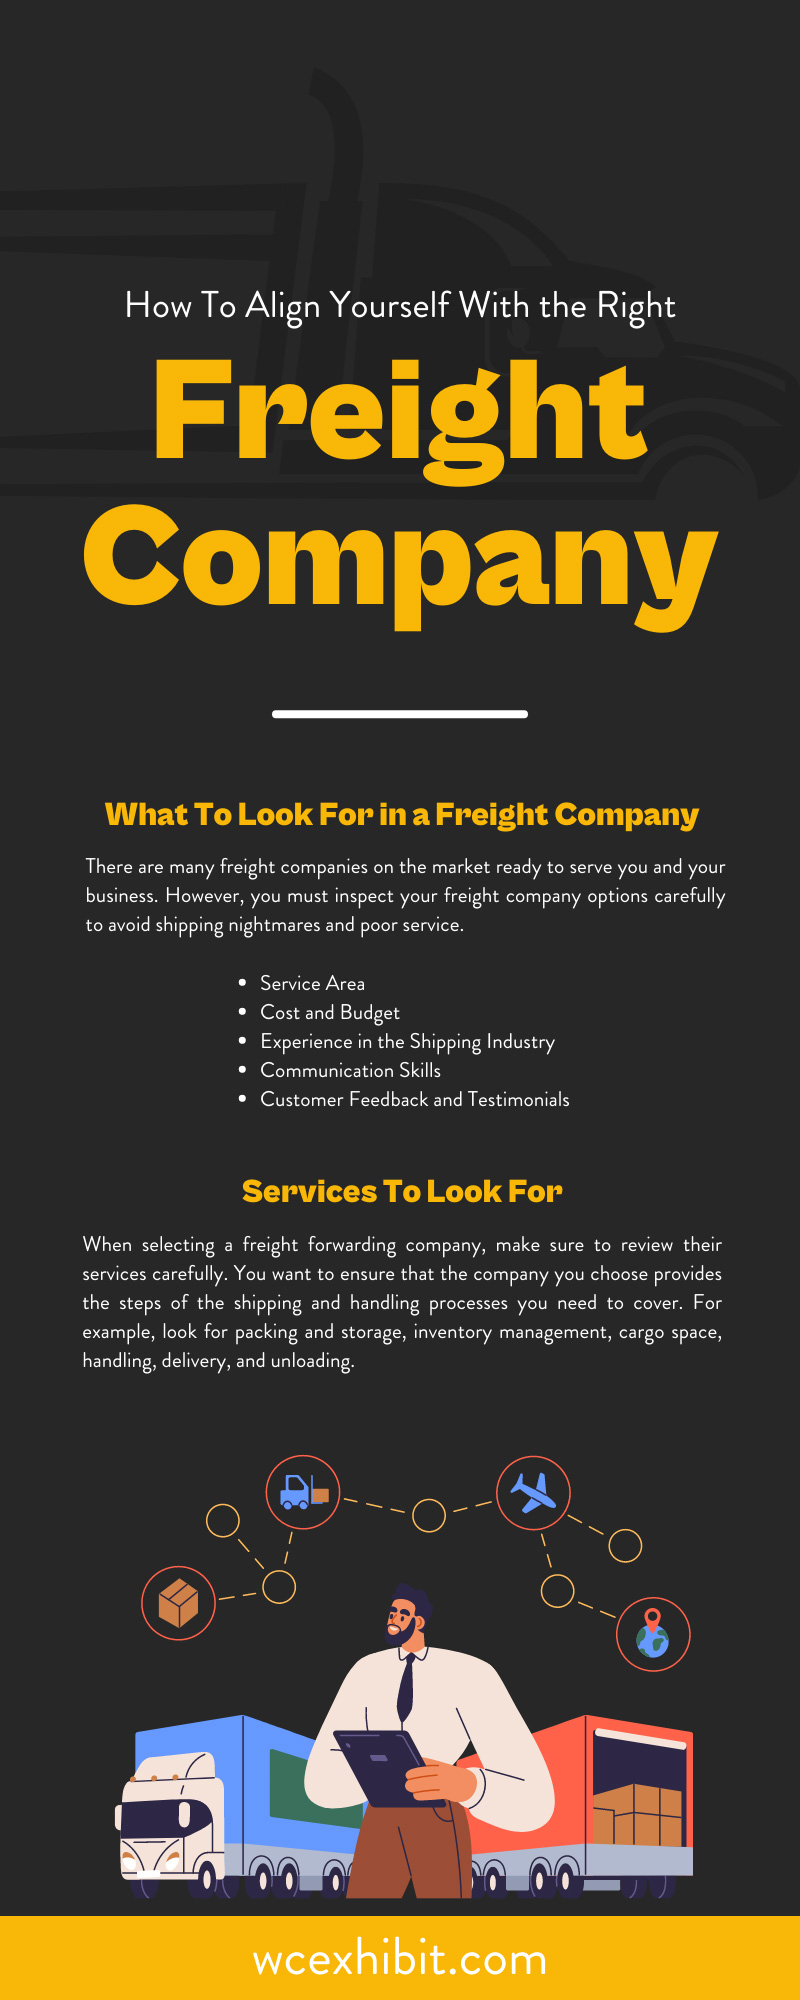 How To Align Yourself With the Right Freight Company